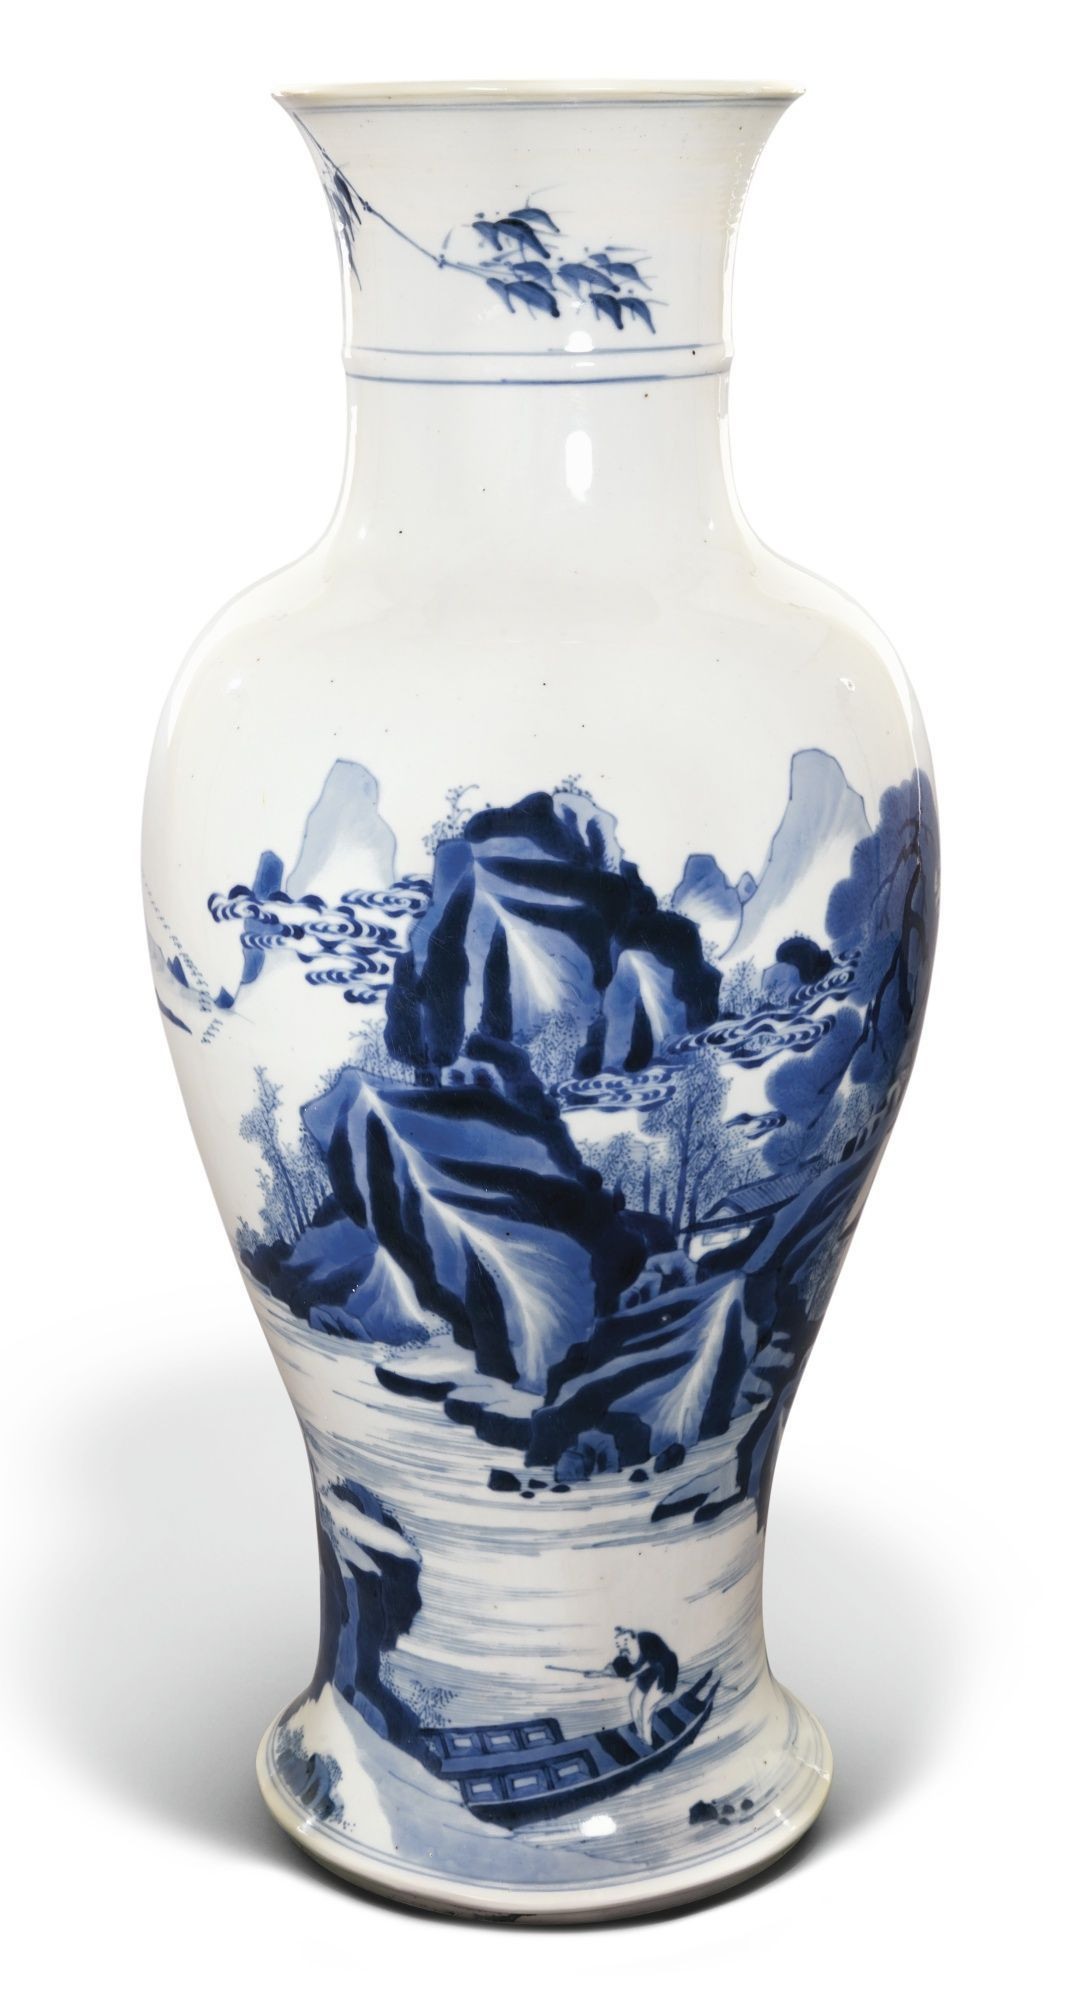 22 Amazing Tall Blue Vase 2024 free download tall blue vase of 32 wide mouth vase the weekly world regarding a large blue and white baluster vase qing dynasty kangxi period